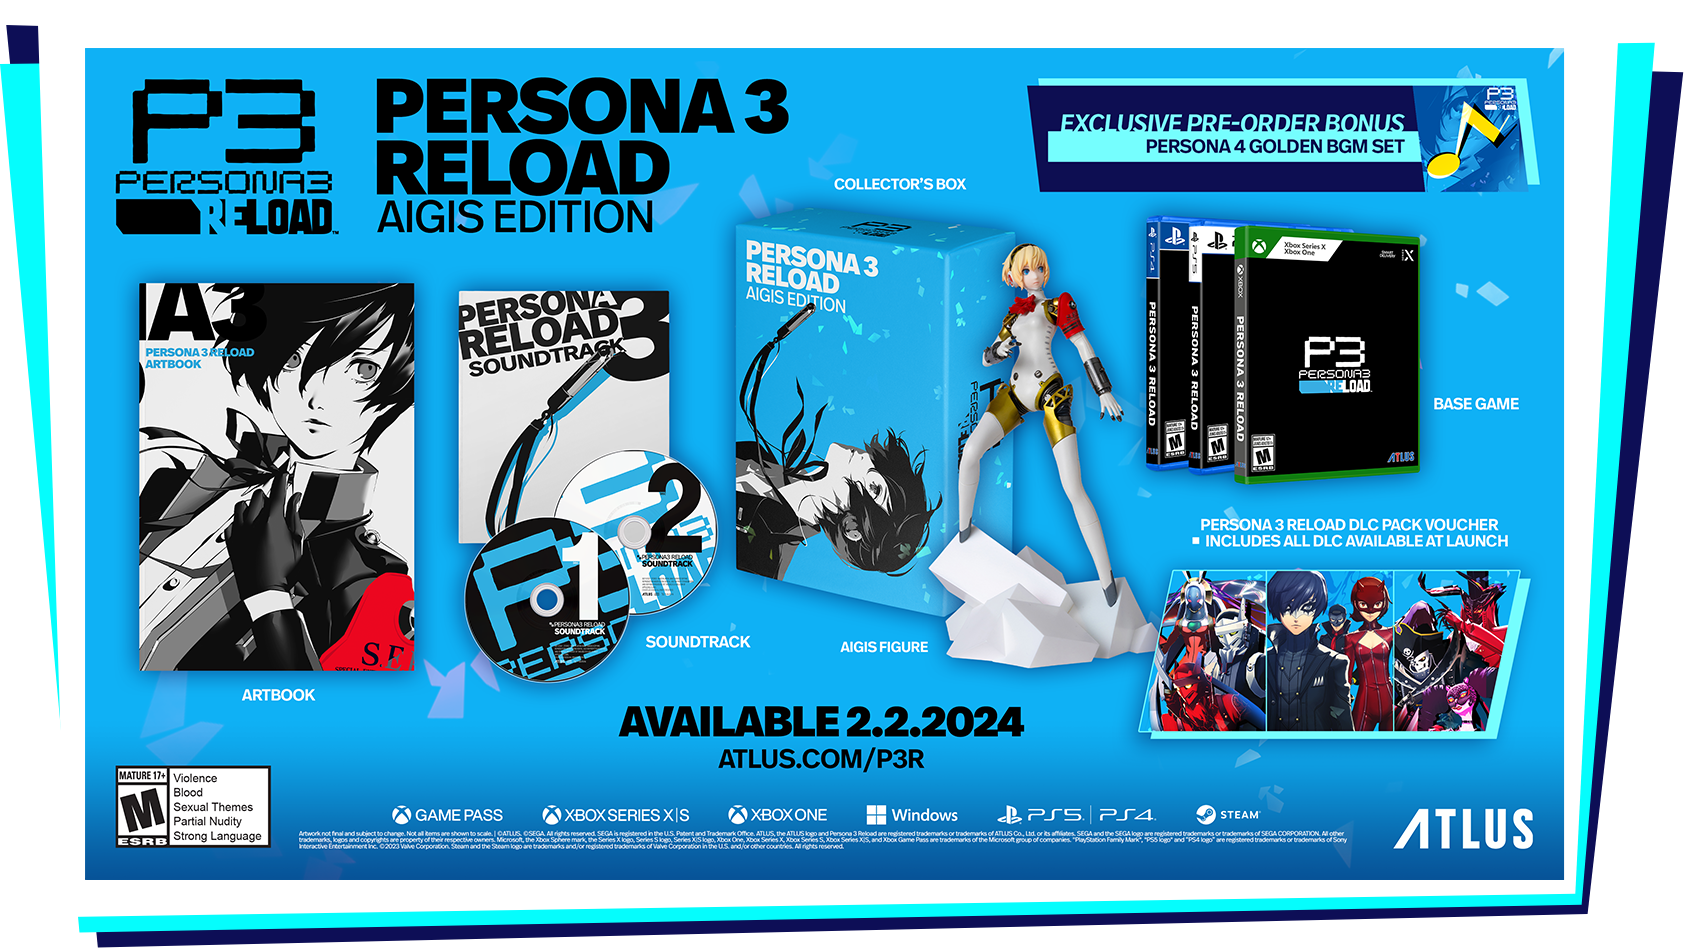 Persona 3 reload editions. Persona 3 Reload Aigis. Persona 3 Reload Айгис. Persona 3 Reload ps4 диск. Persona 3 Reload артбук.